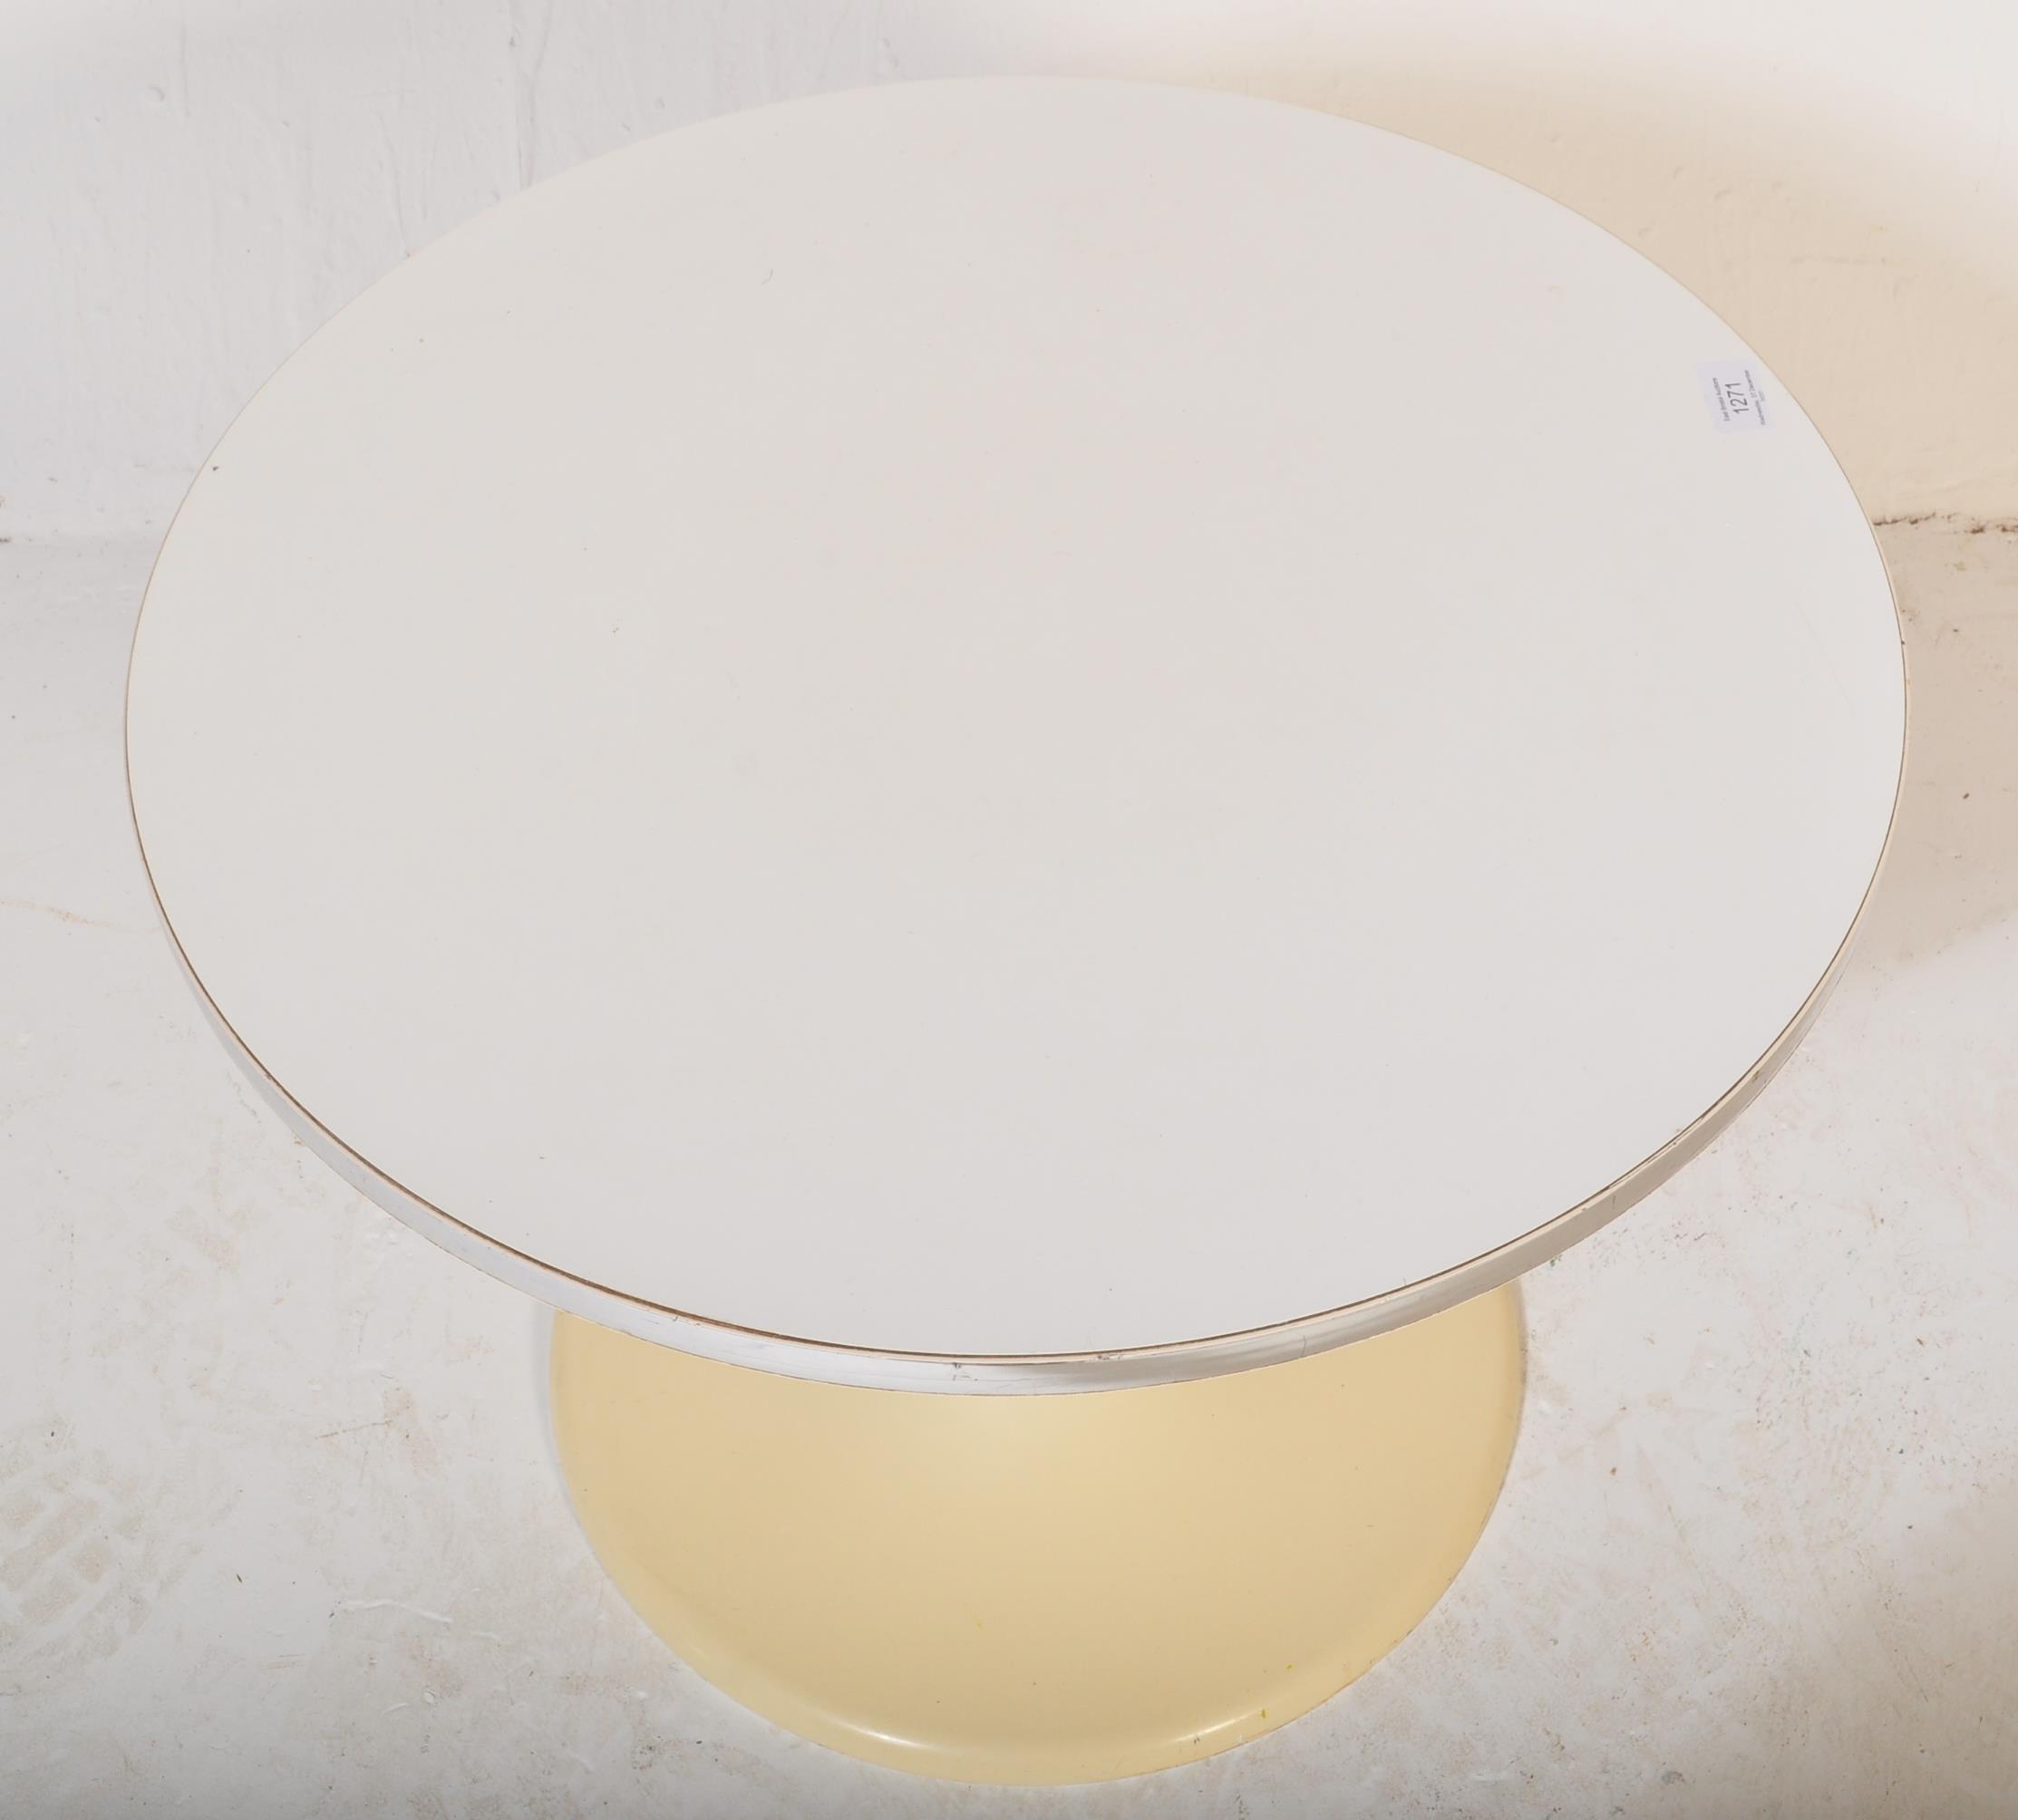 VINTAGE WHITE ARCANA STYLE ROUND OCCASIONAL TABLE - Image 3 of 4